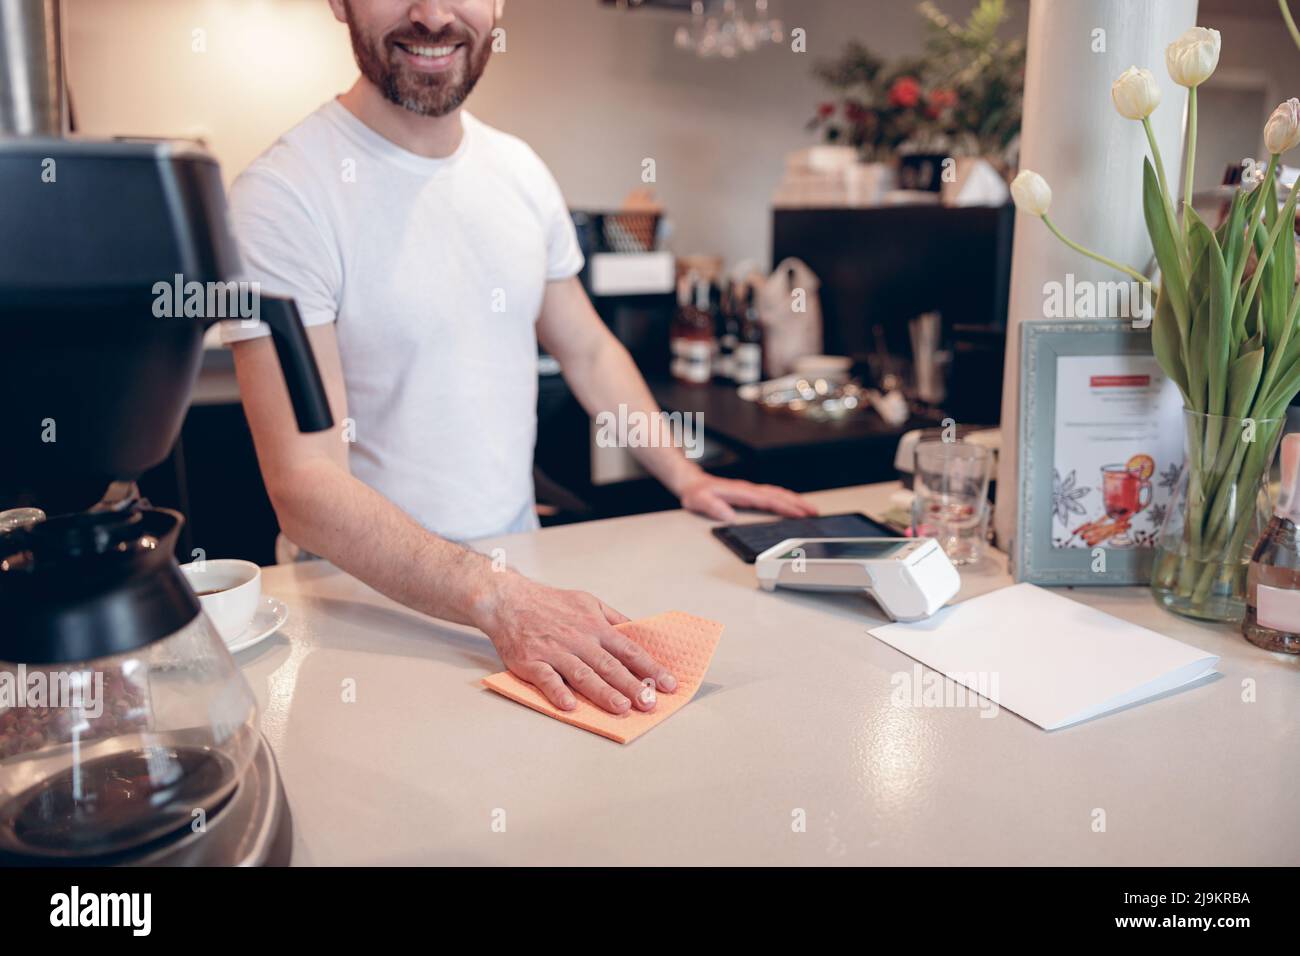 Cleaning counter at cafeteria concept. Male barista working at bar and keep it clean. Stock Photo